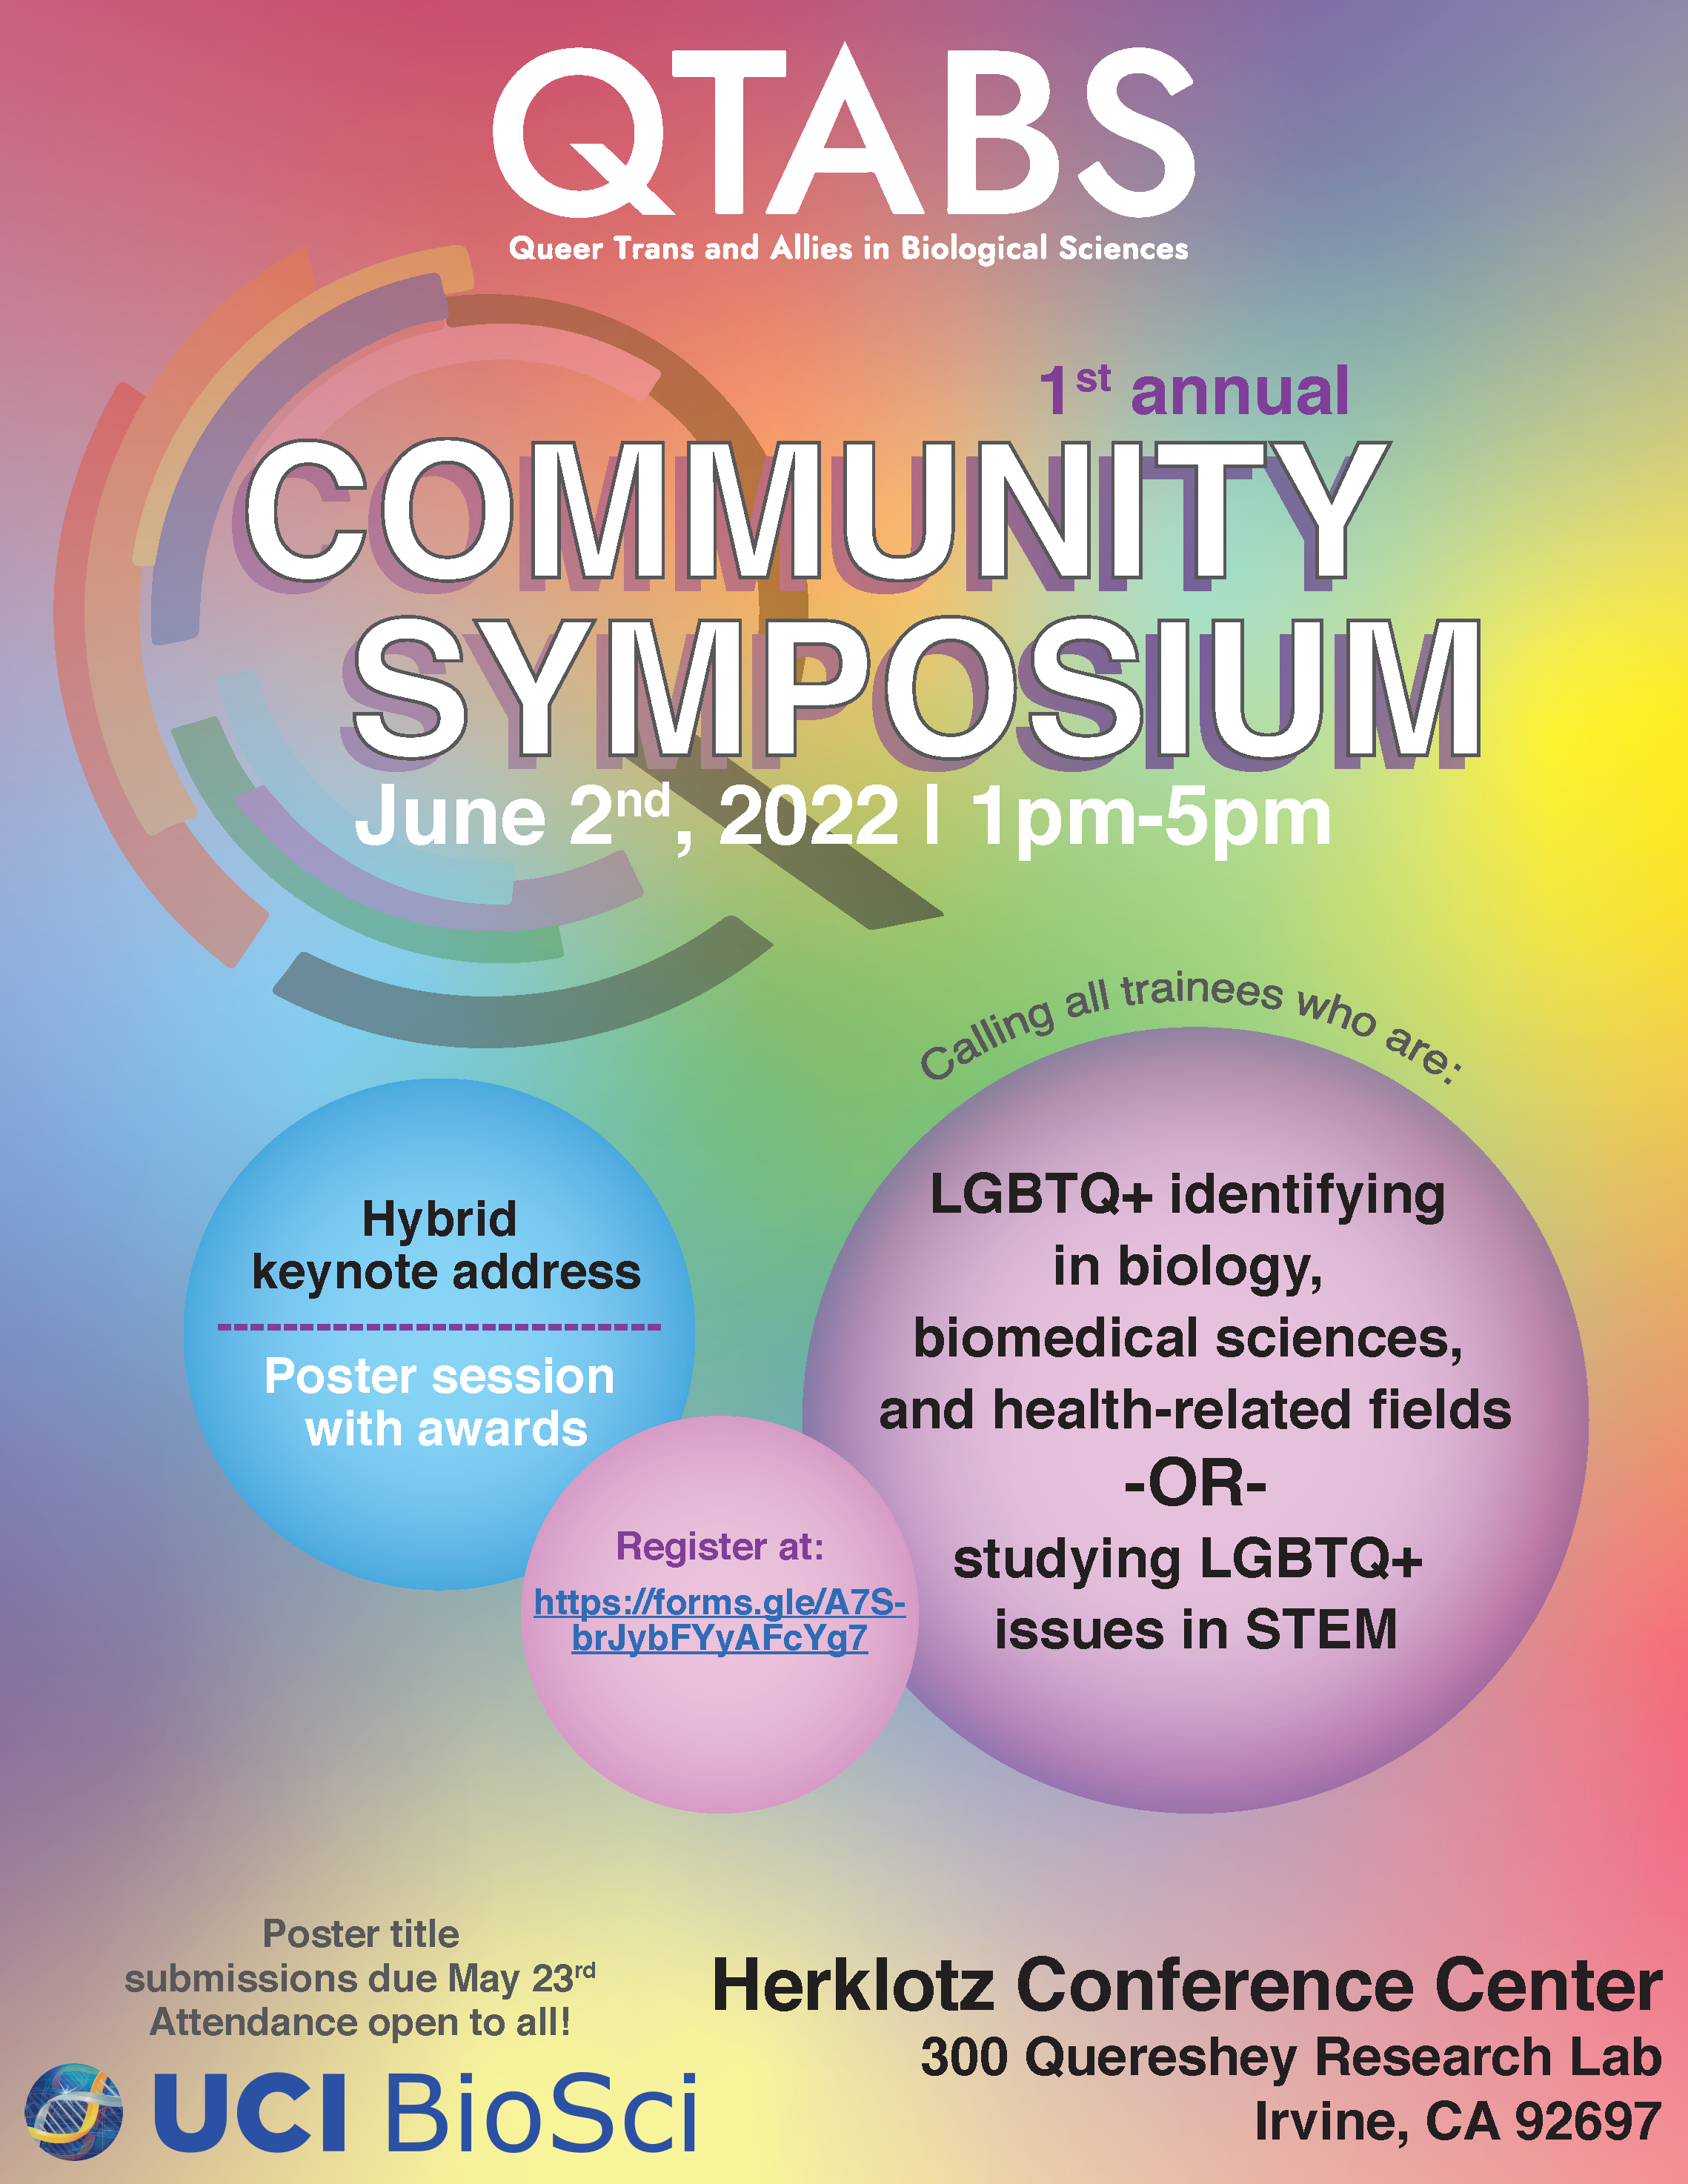 Queer, Trans, and Allies in the Biological Sciences (QTABS) Community Symposium on June 2, 2022 from 1:00-5:00 PM in the CNLM Courtyard and Herklotz Conference Room